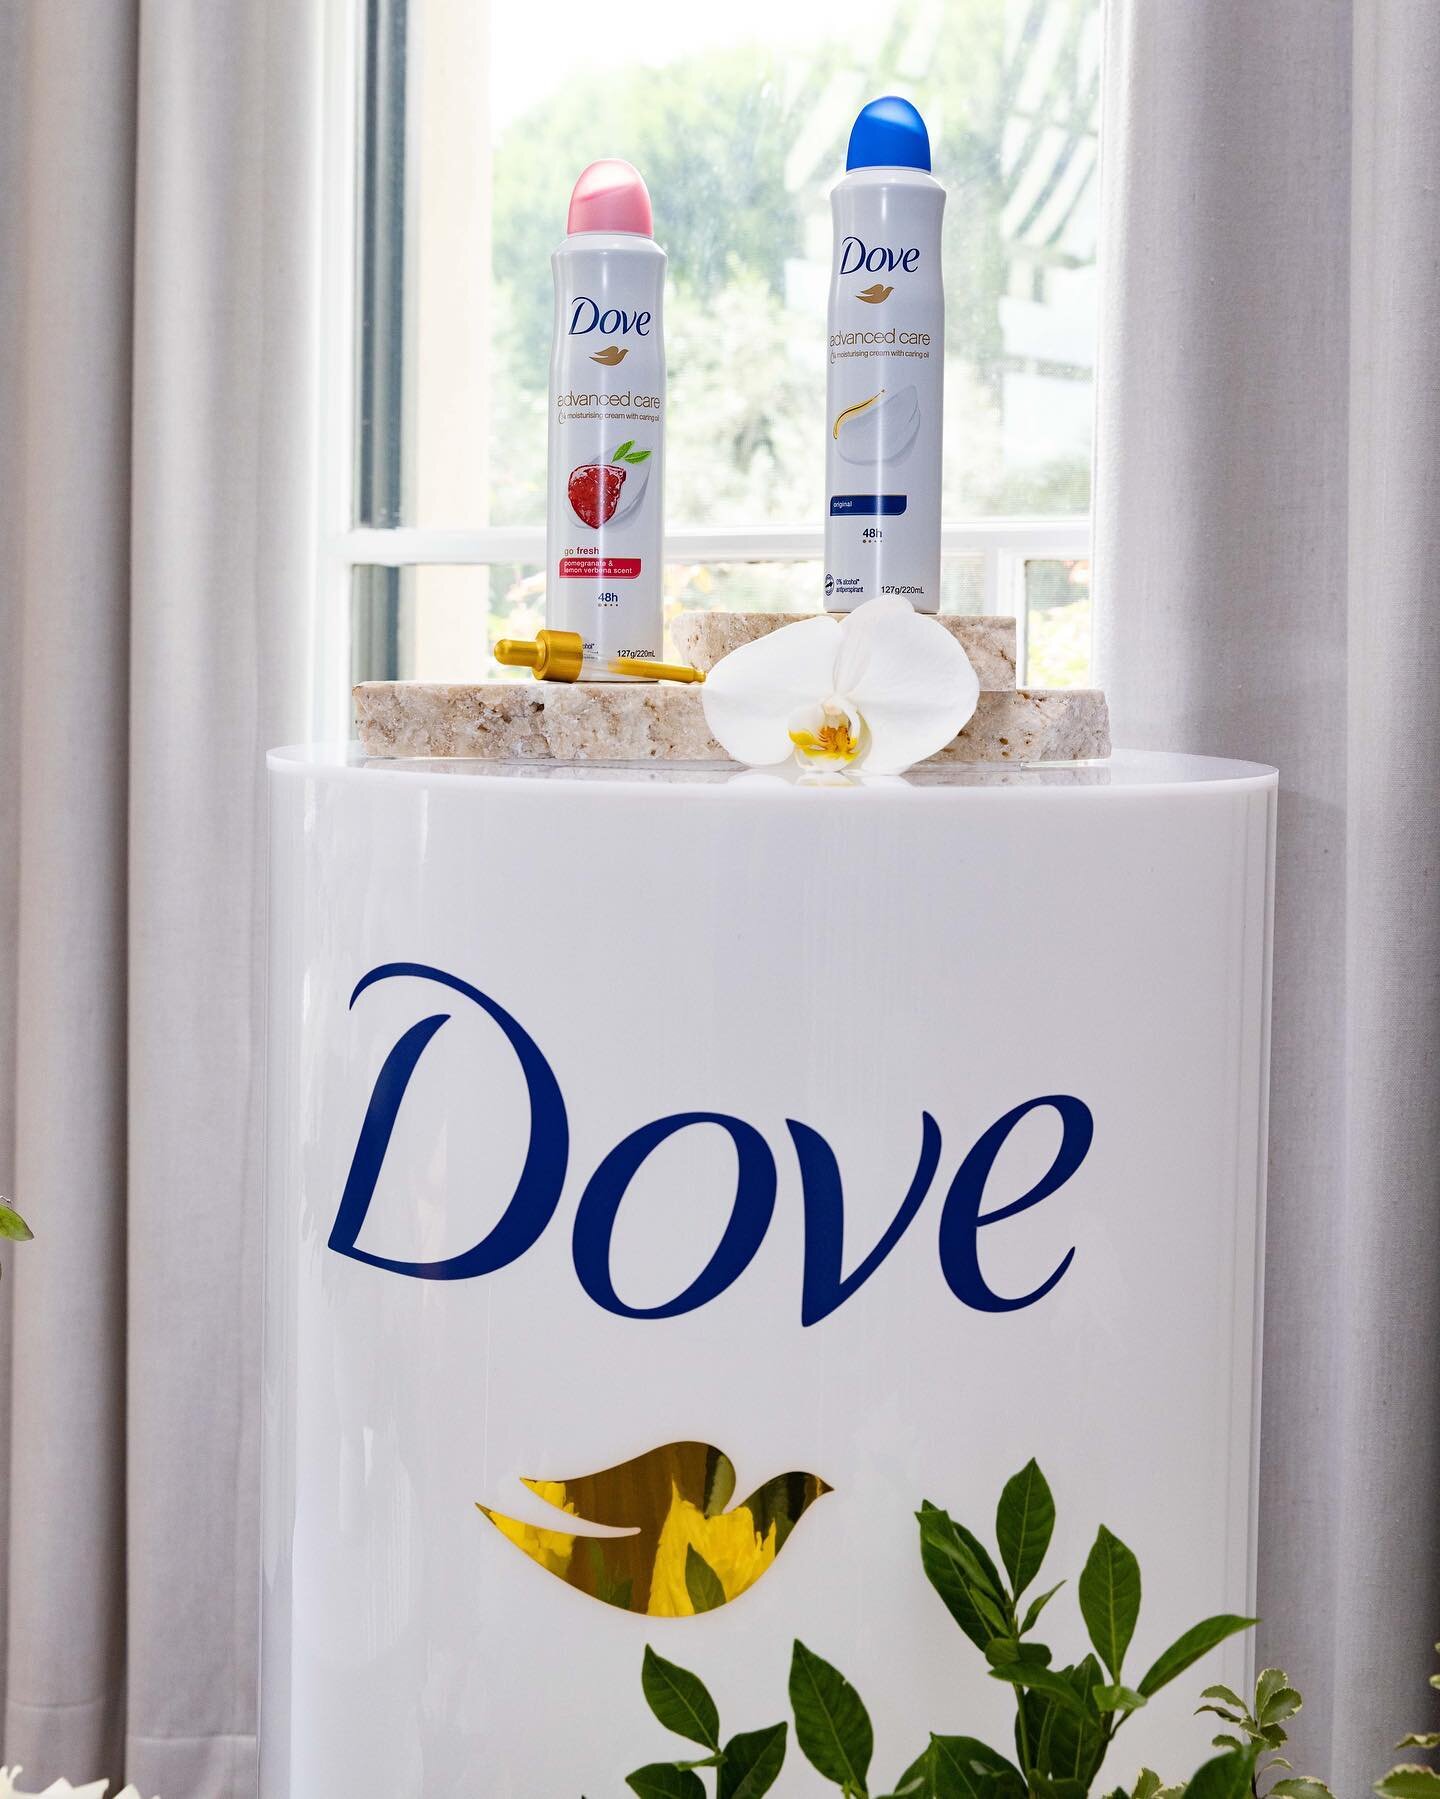 Swooning over this brand activation that we styled for @dove earlier this week. 

#dovecamp

Photo: @scottehler 
Flowers: @theposygarden 
Venue: @bells_at_killcare